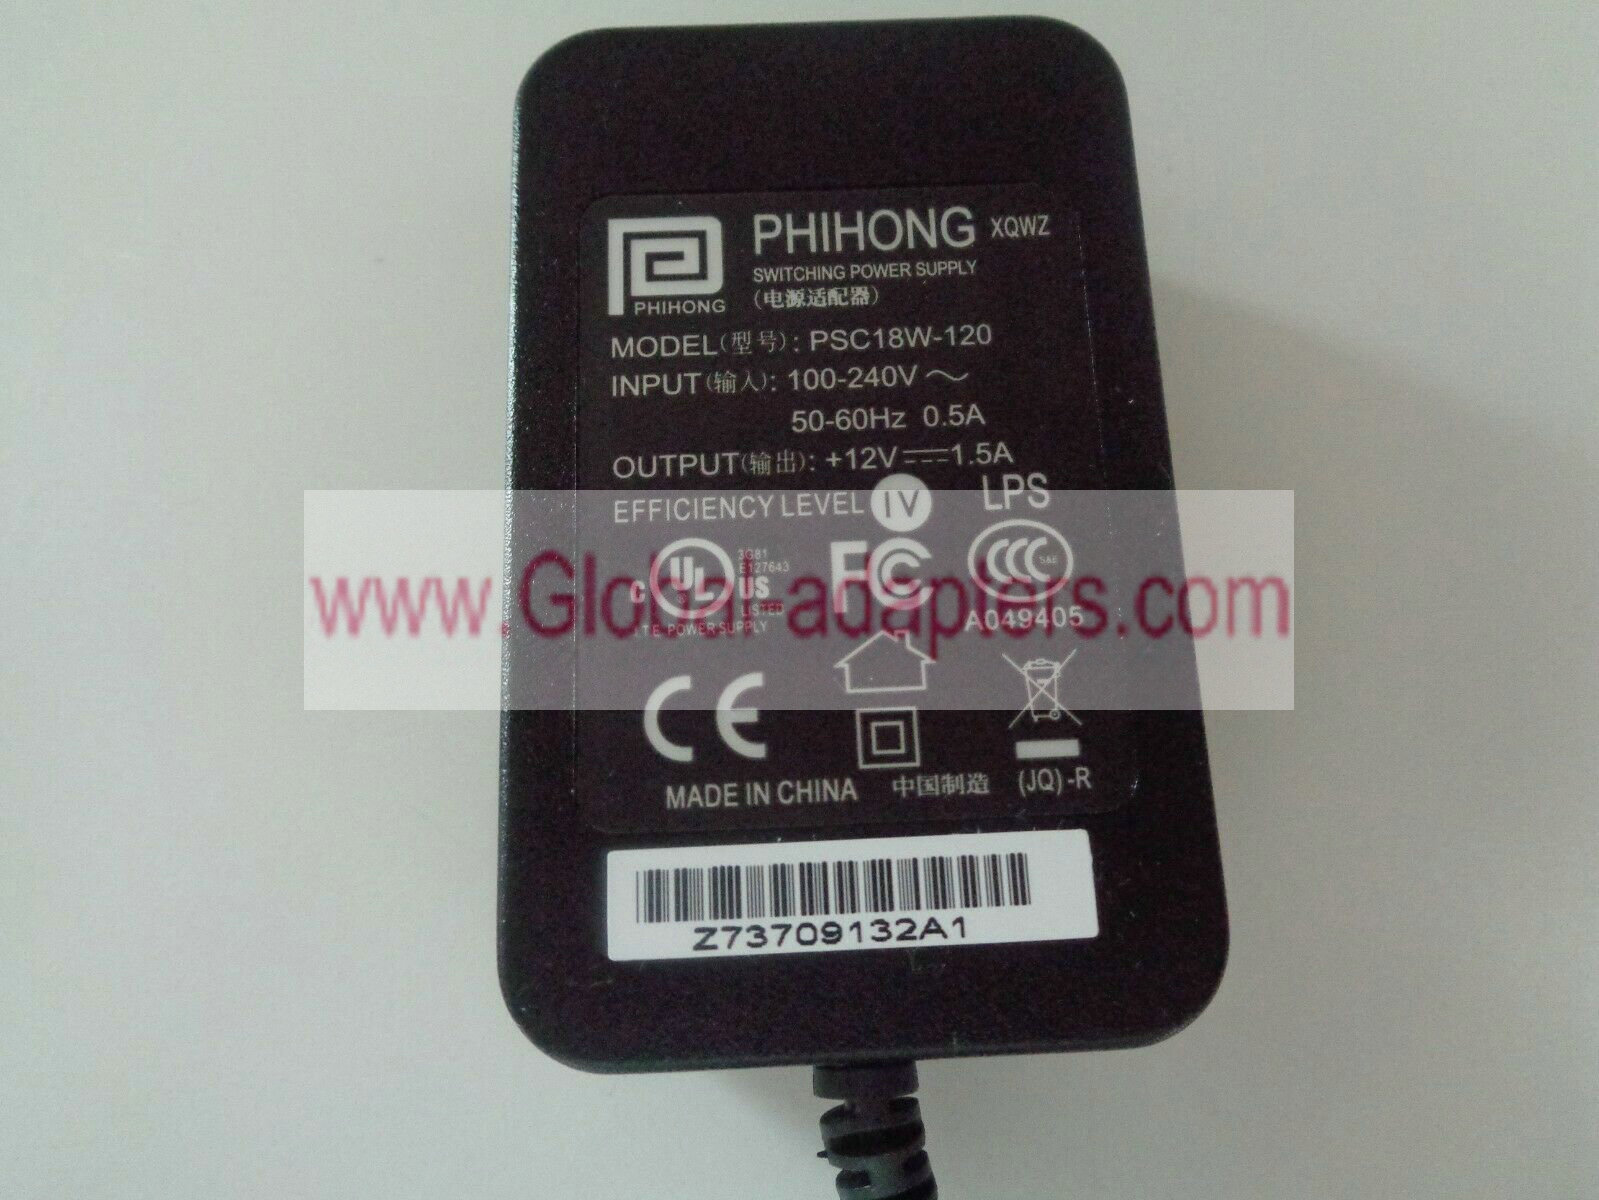 New PHIHONG PSC18W-120 12V 1.5A POWER SUPPLY AC ADAPTER - Click Image to Close